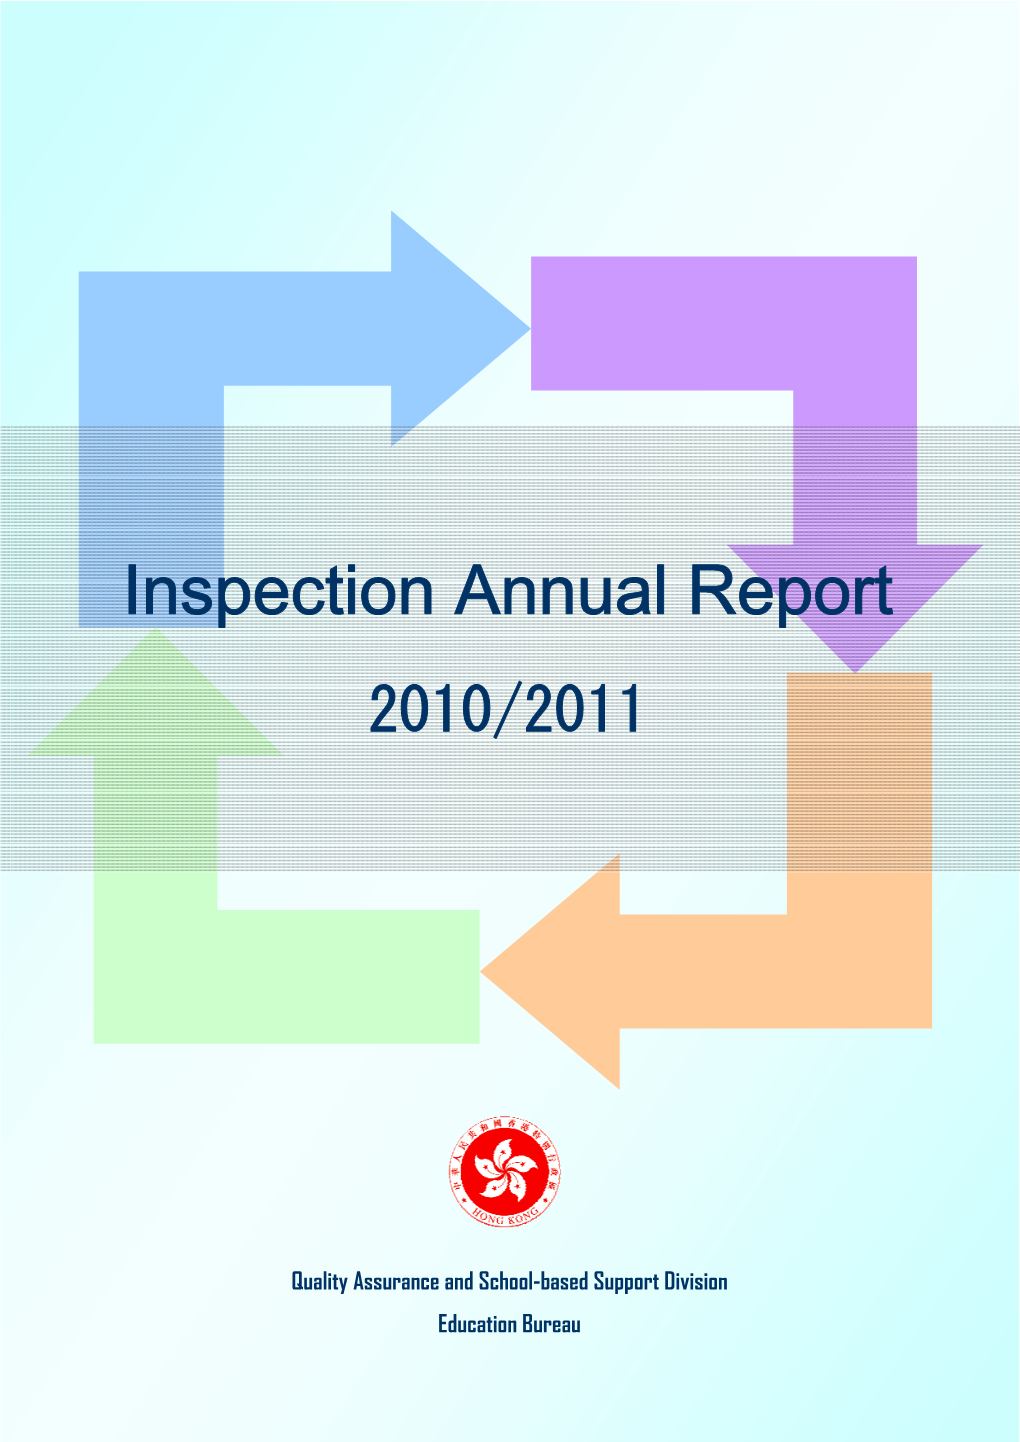 Inspection Annual Report 2010/2011